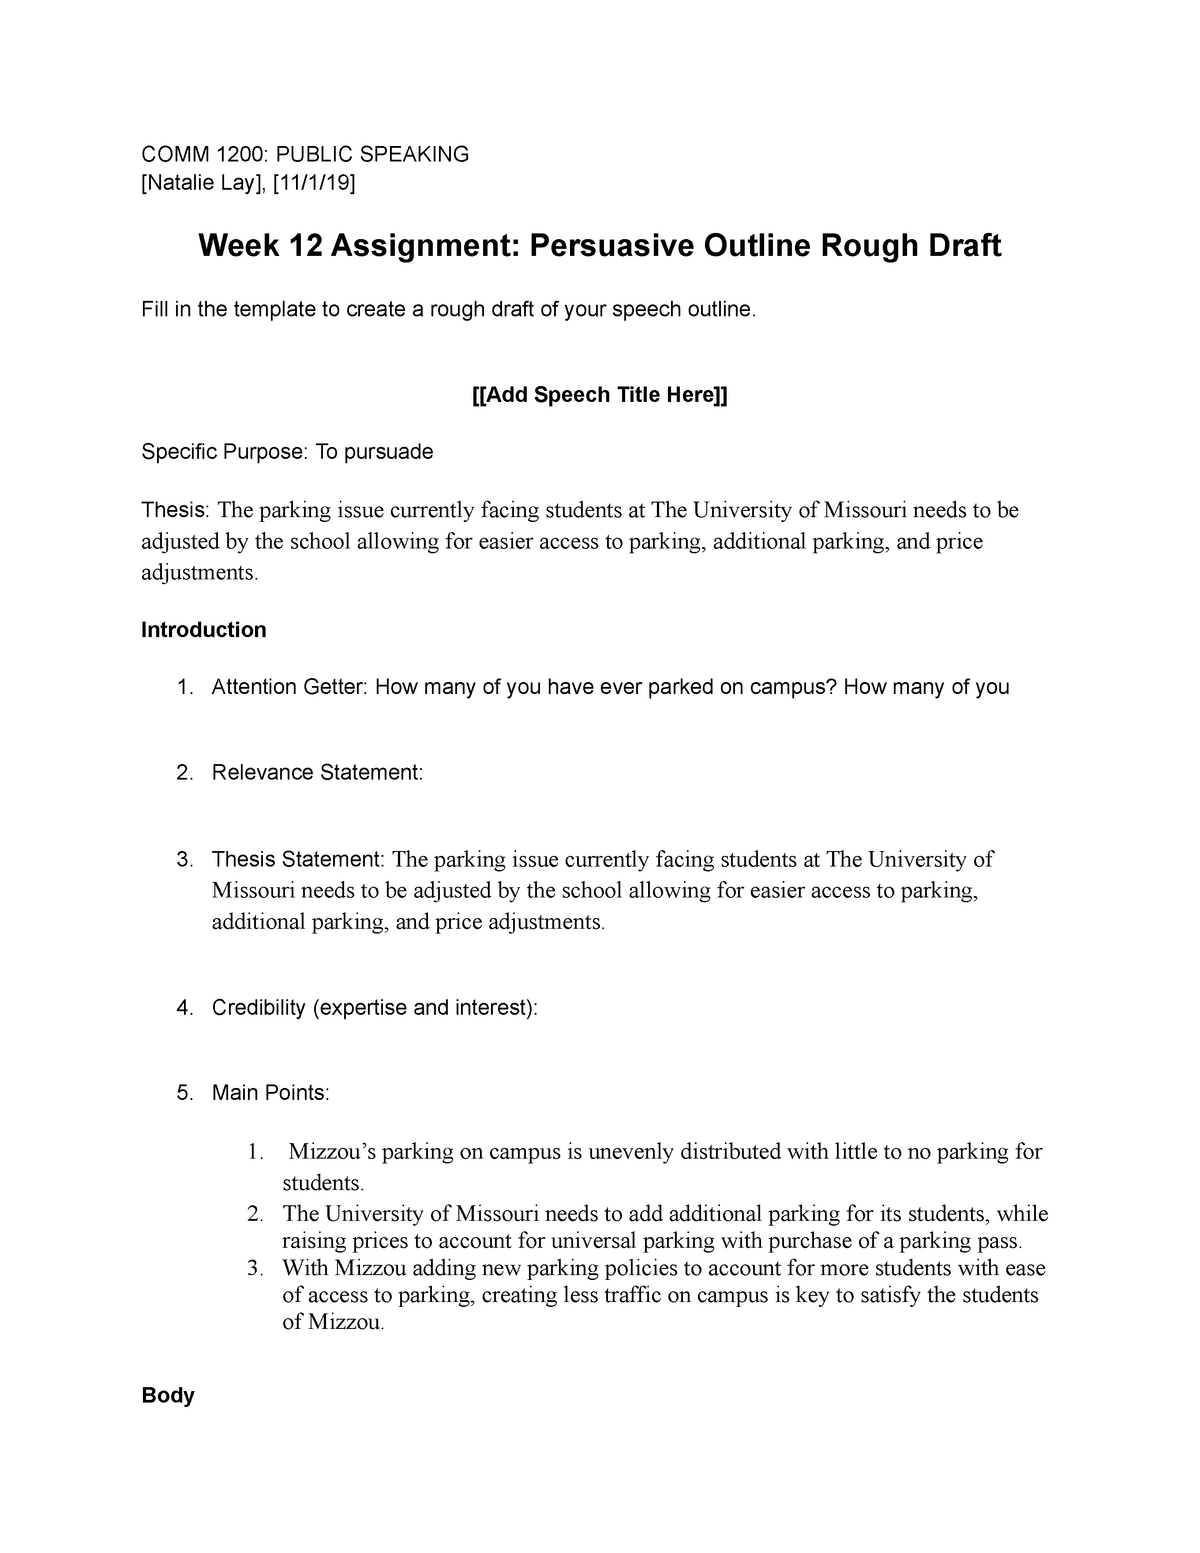 rough draft outline examples